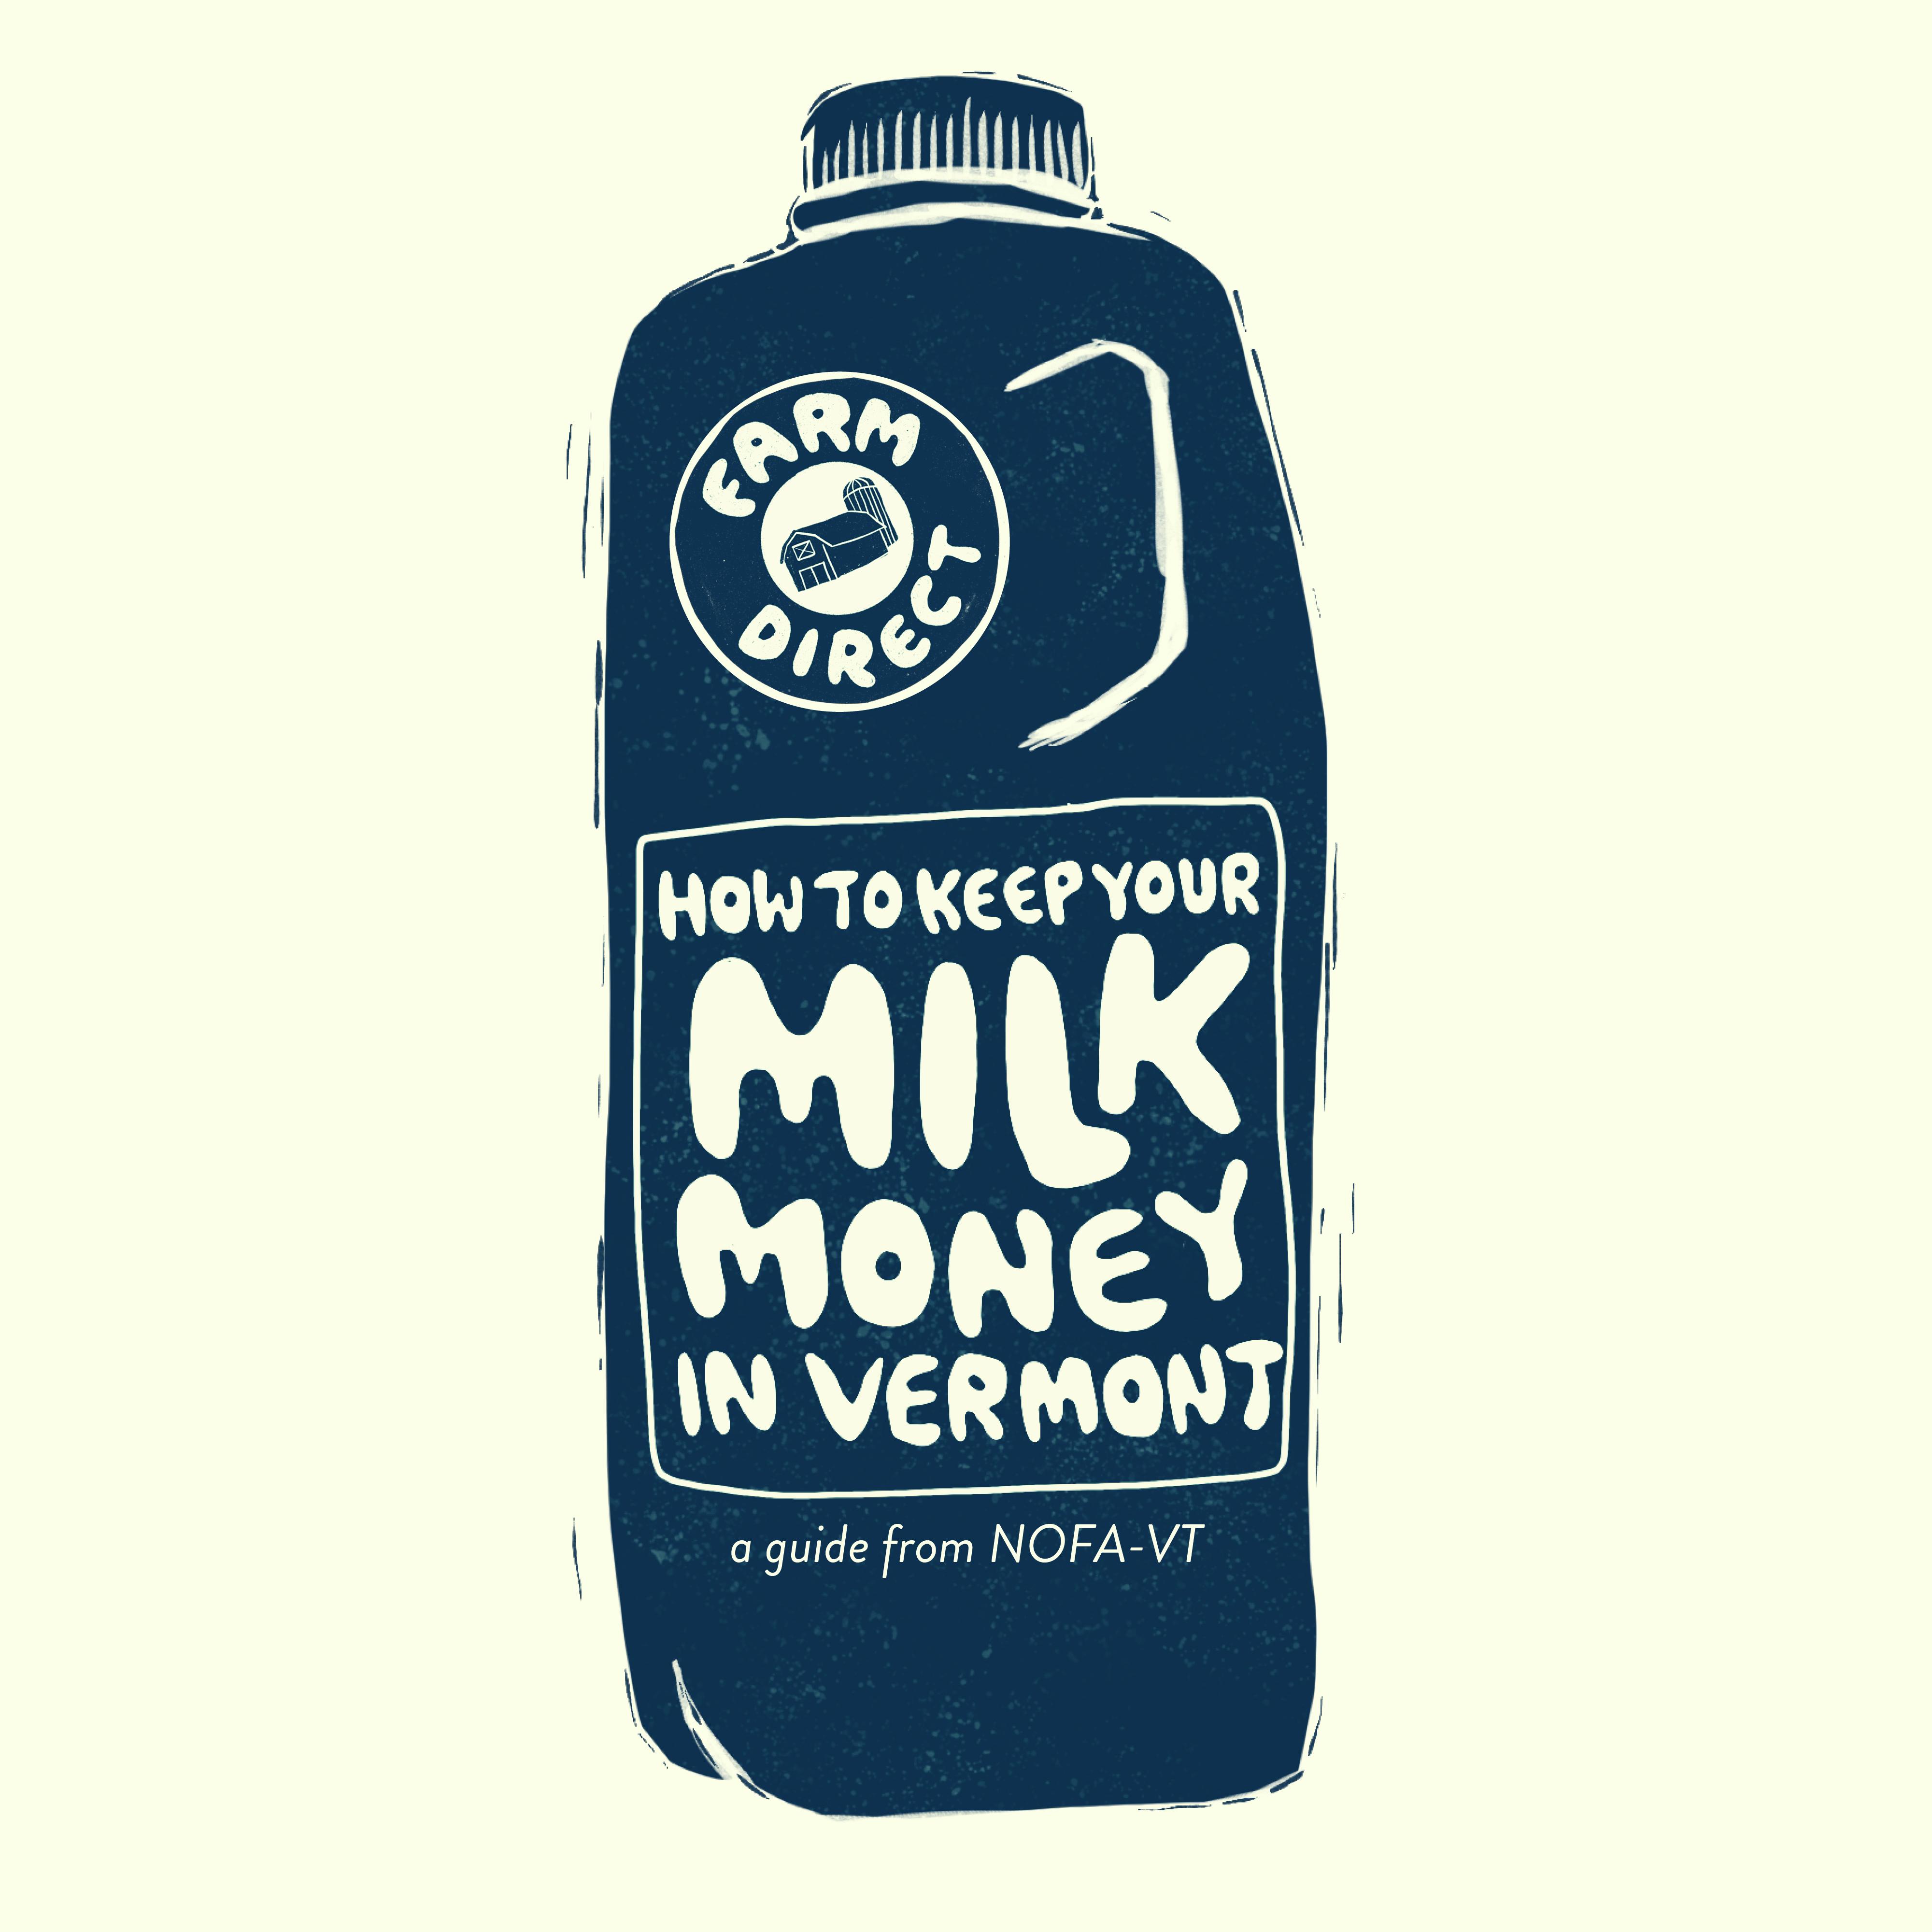 How to keep your milk money in vermont.